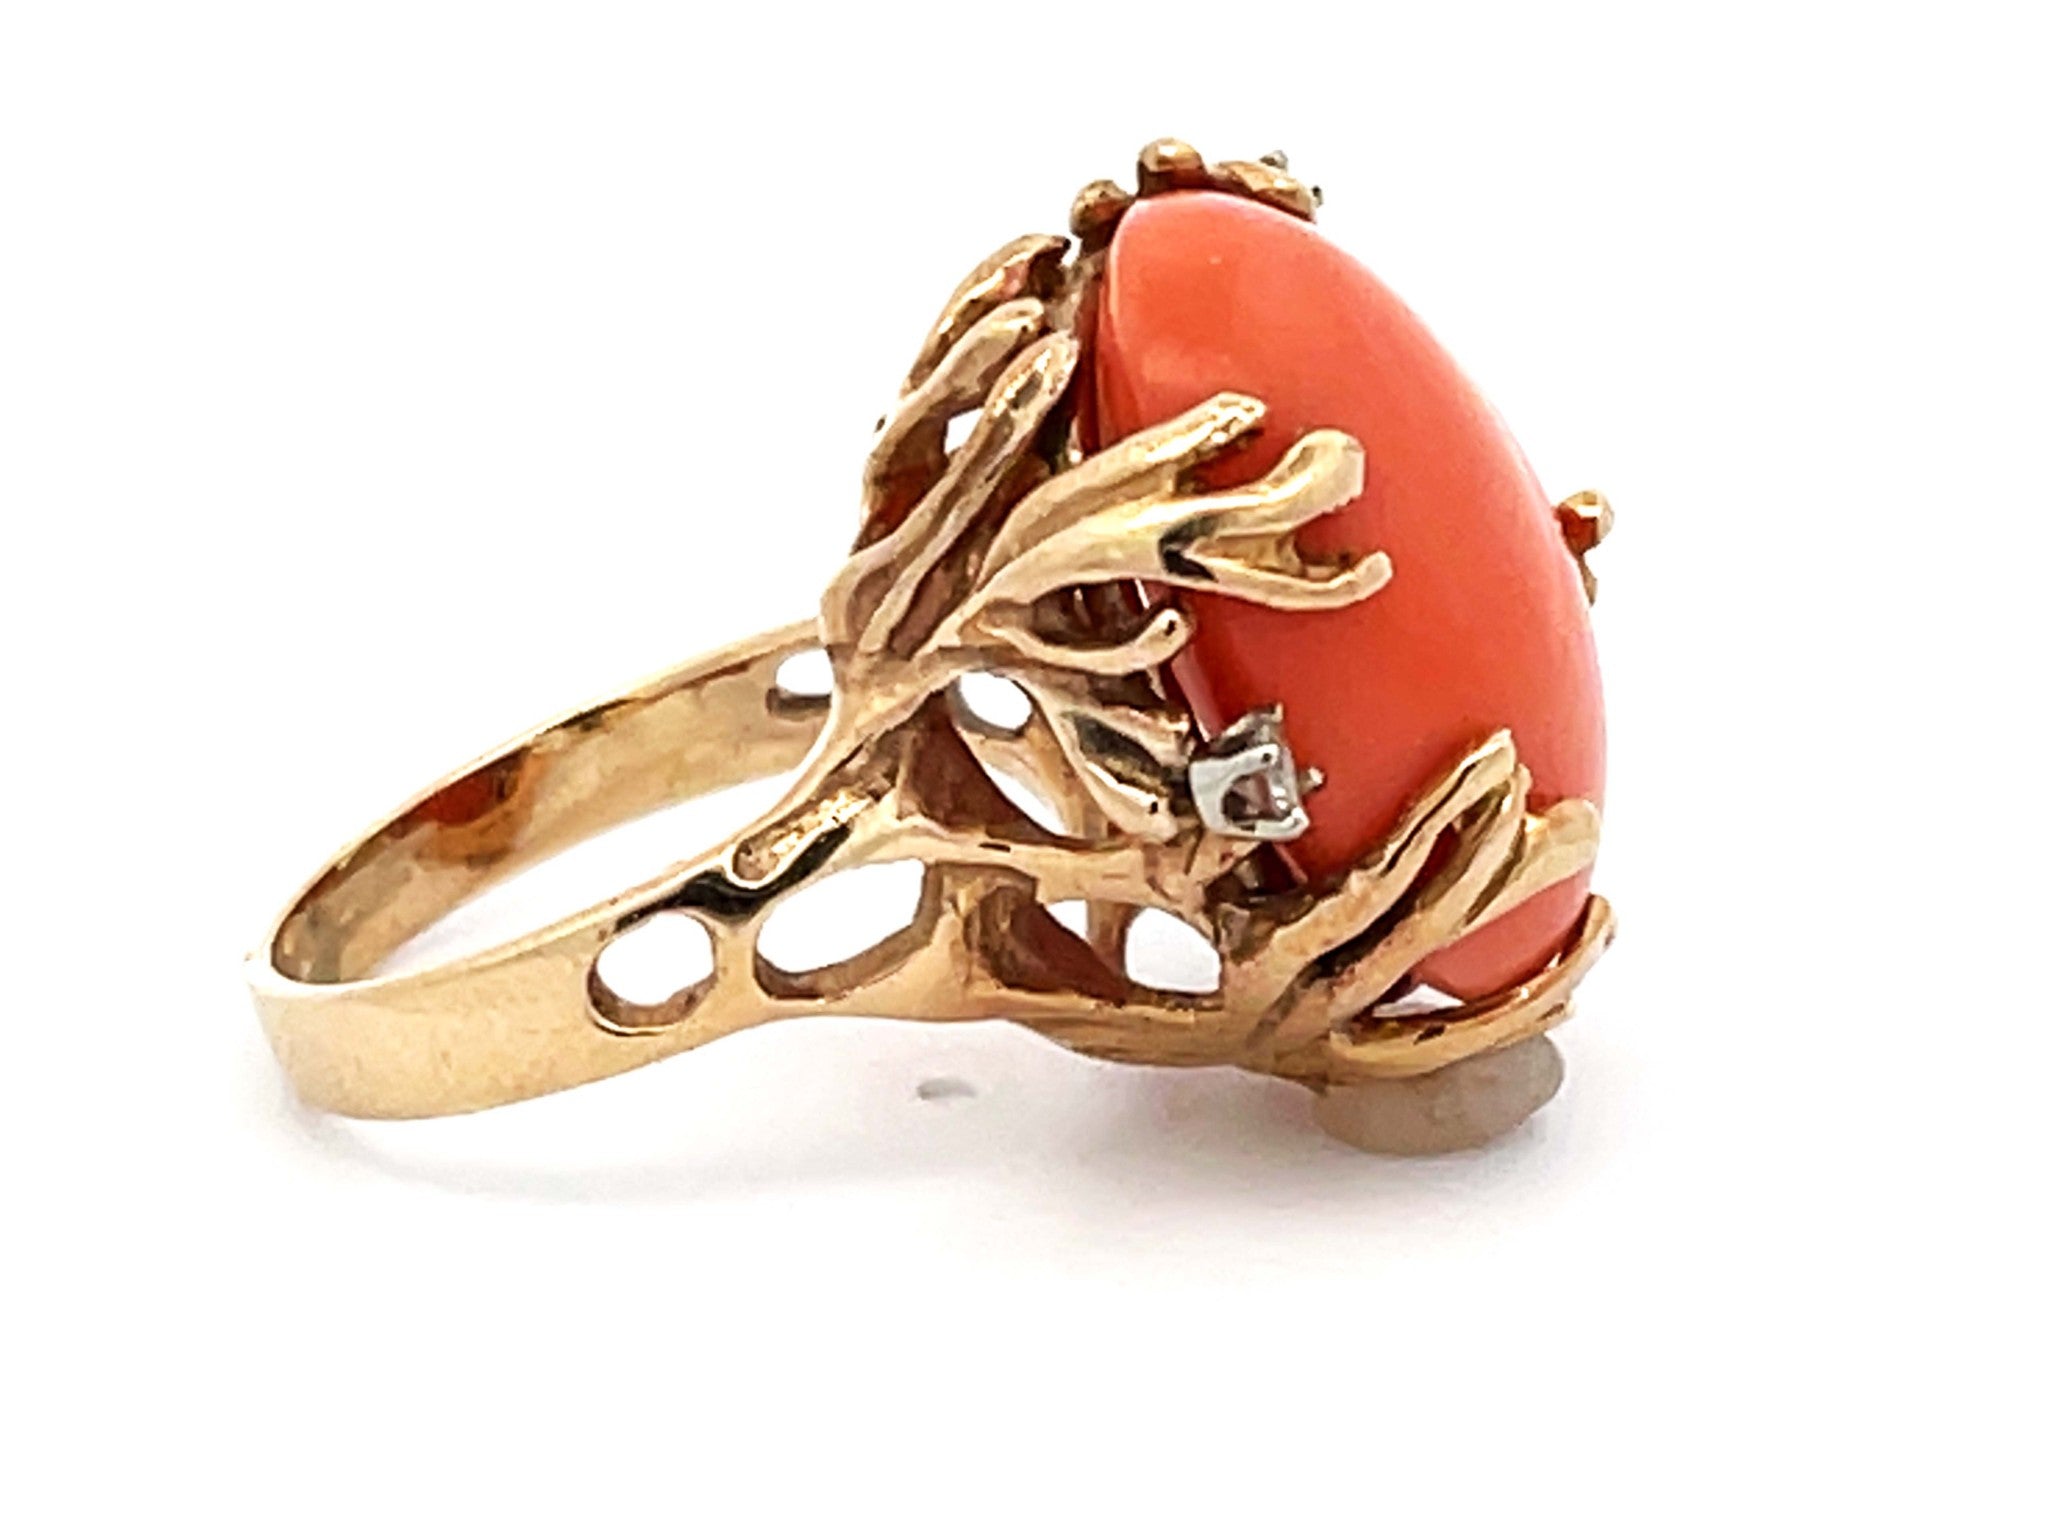 Vintage Mediterranean Coral and Diamond Ring in 14k Yellow Gold